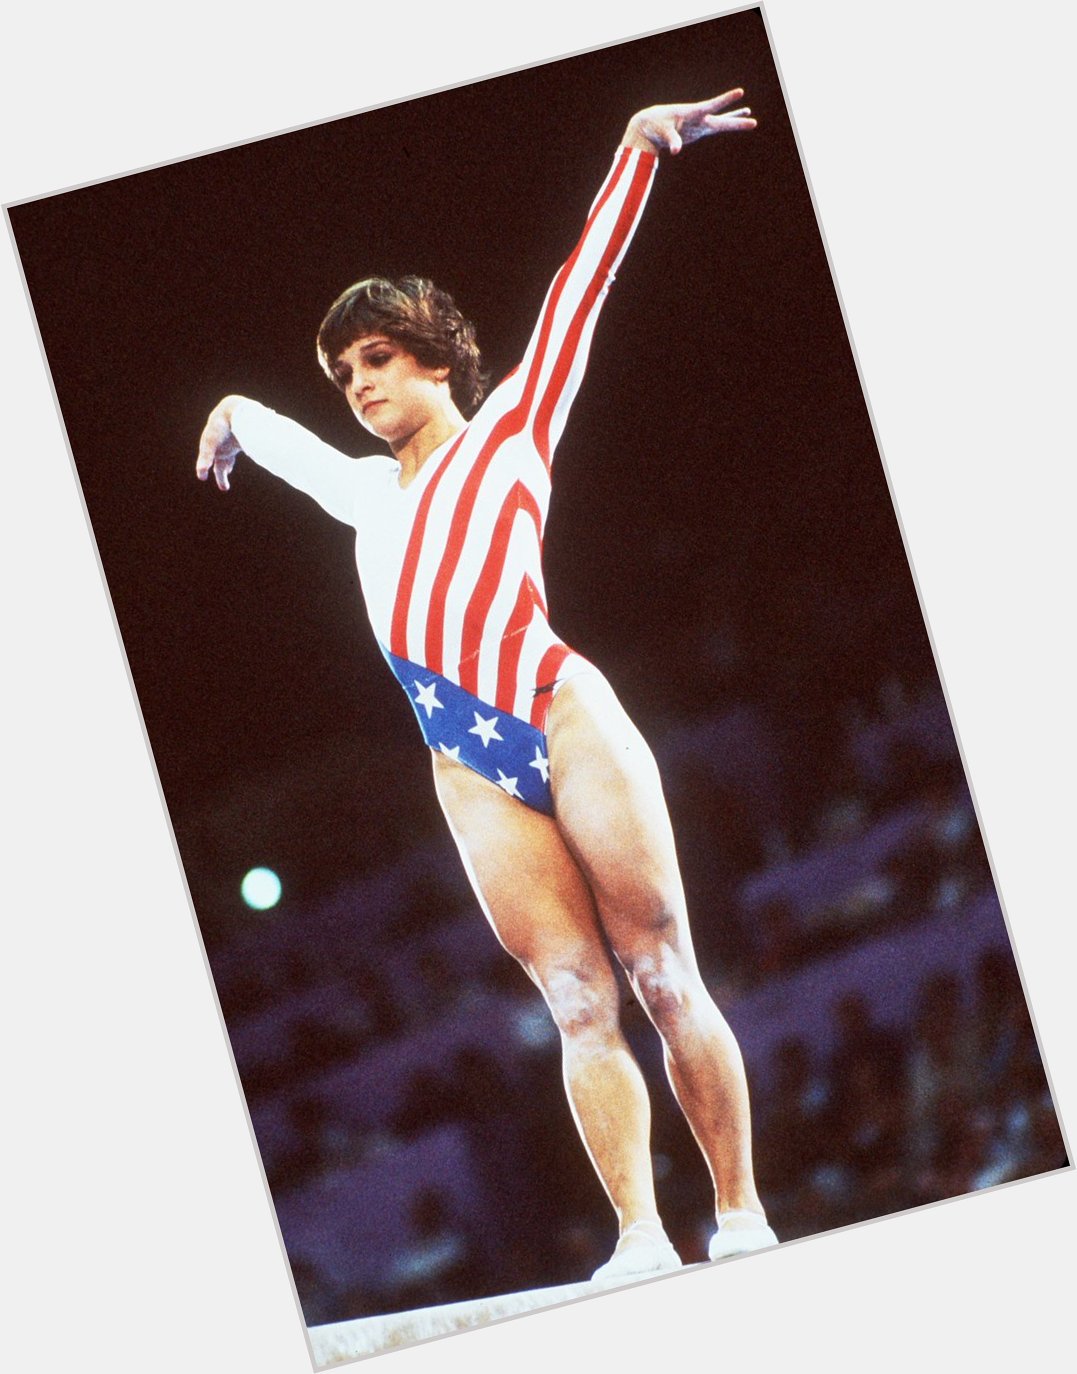 Happy 50th Birthday to c/o 2004 Texas Sports Hall of Fame inductee, Mary Lou Retton! 